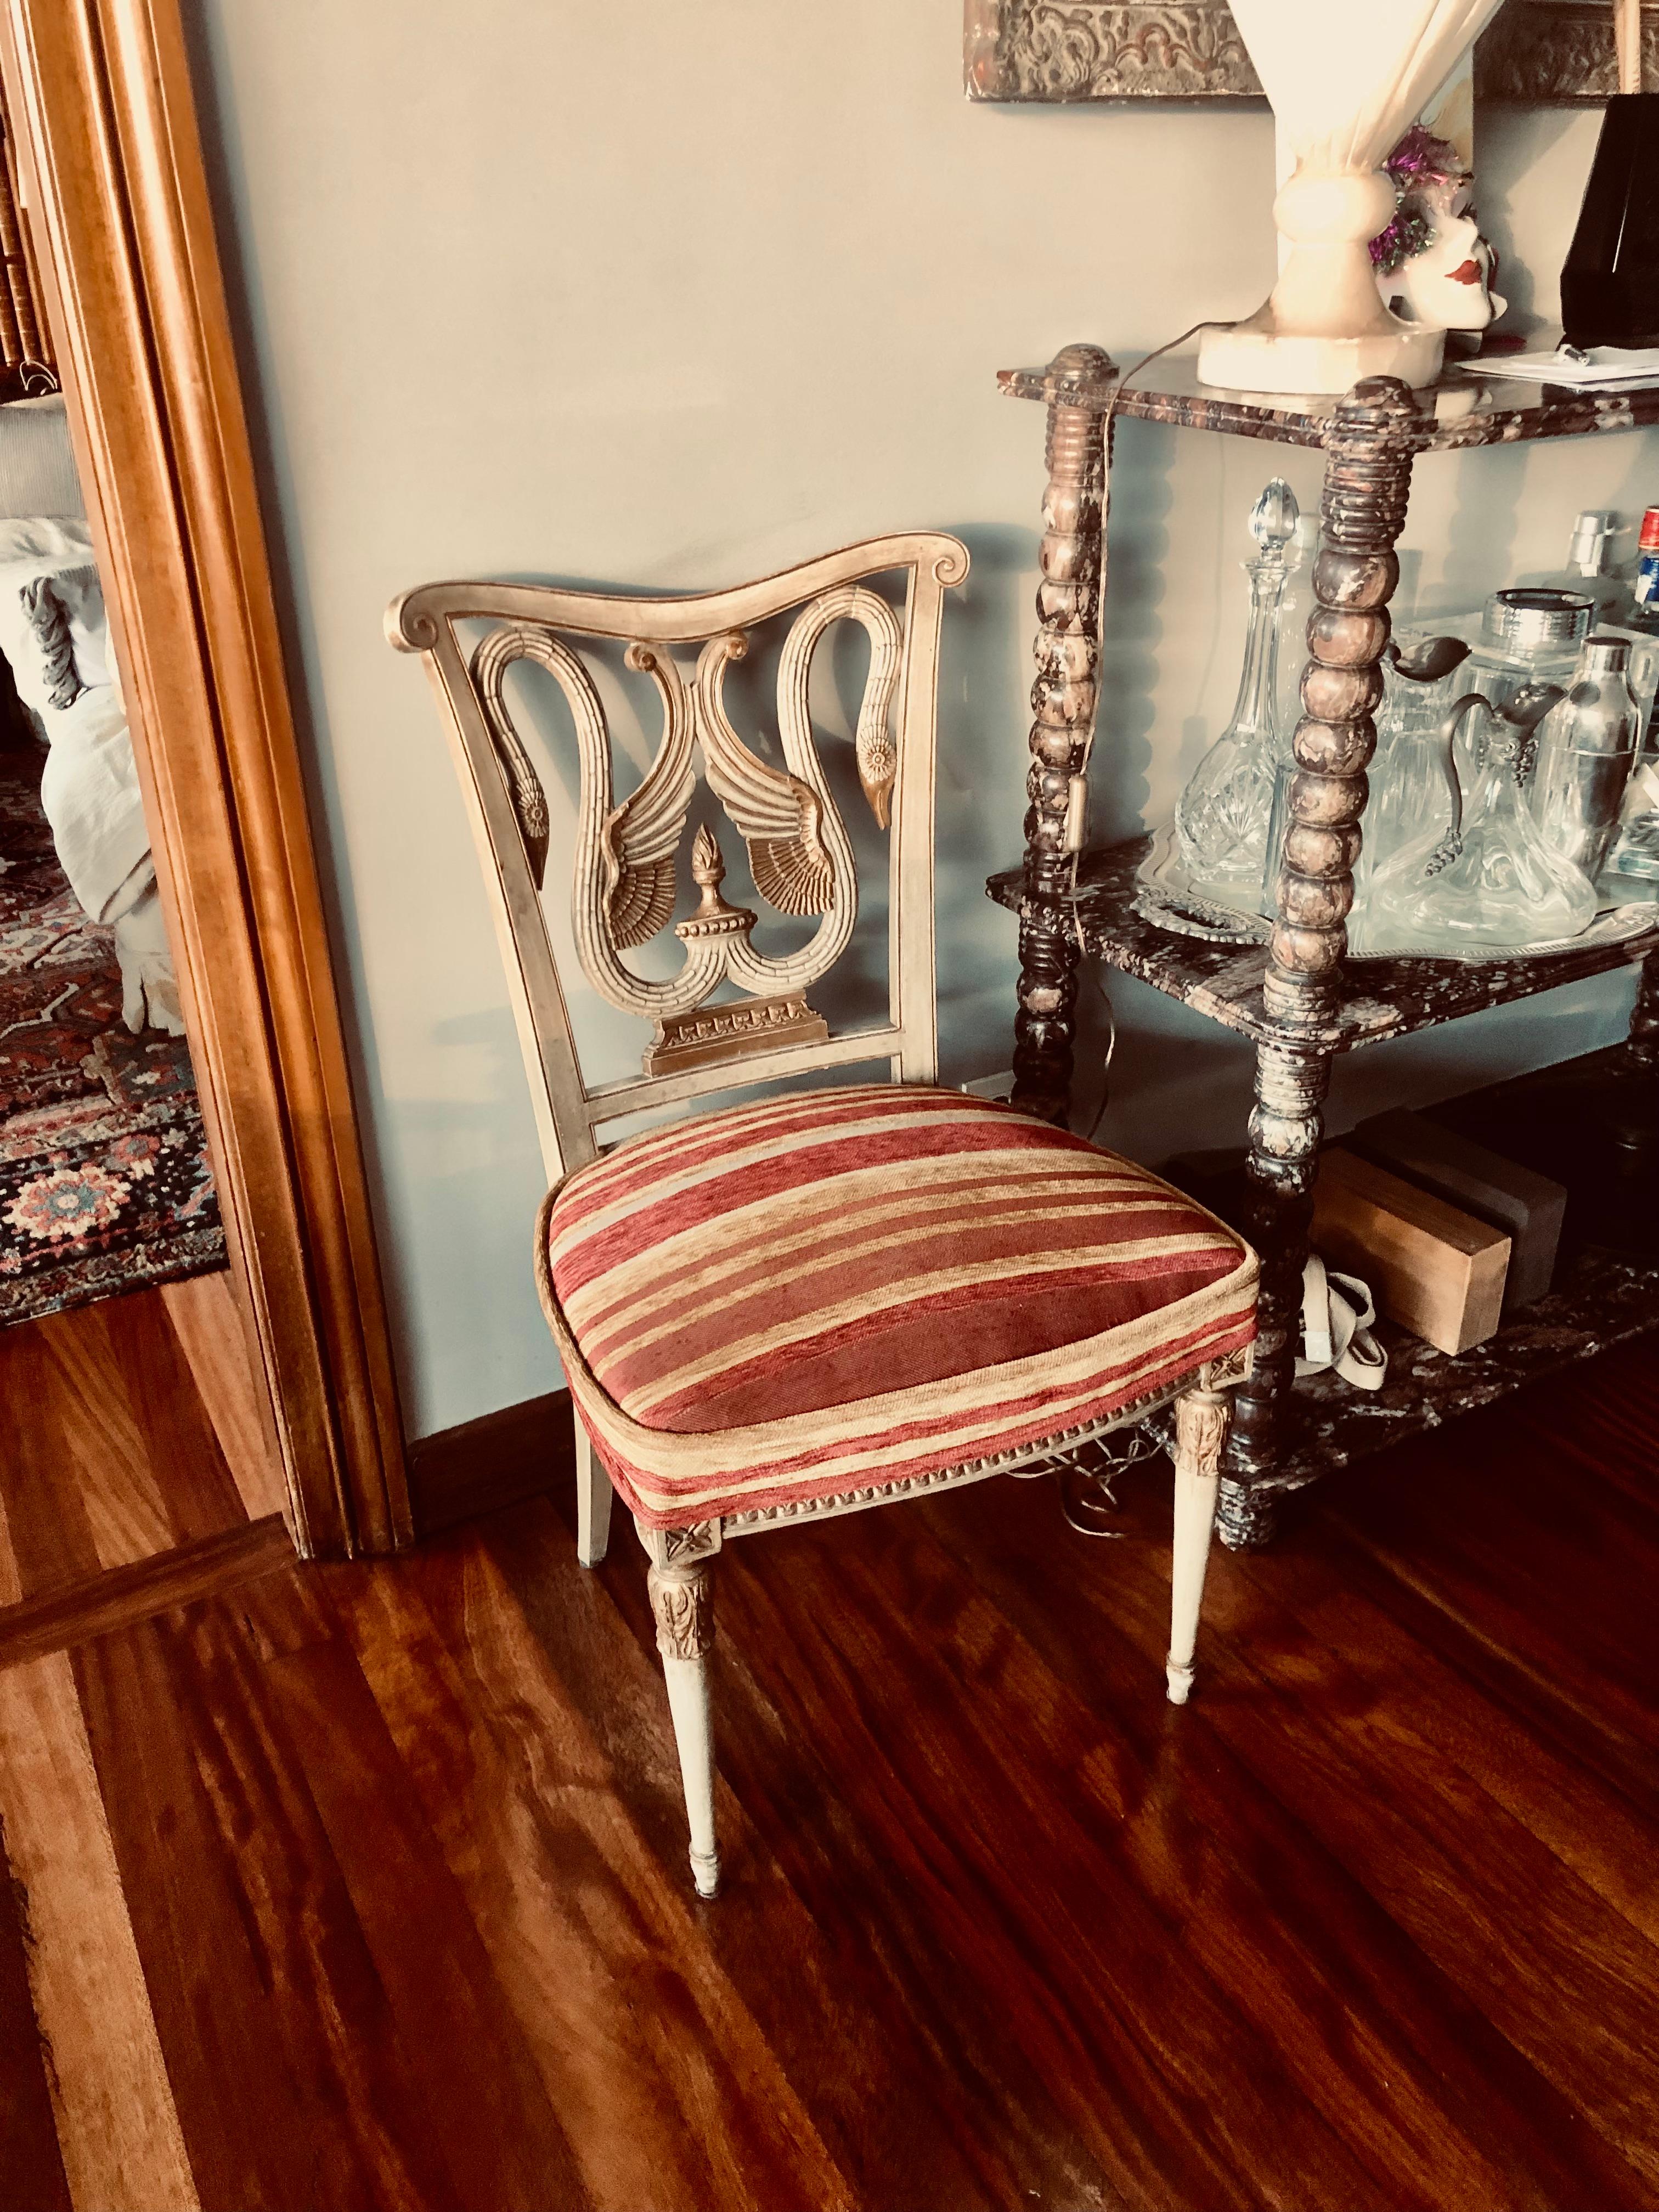 Neoclassical Revival  Italian  19th chairs.
A very nice and decorative Chair model with a pair of beautiful swans at back of the chair.
Nicely cut decor around the chair seat & reeded legs.
The chairs is upholstered in a classic stripe velvet